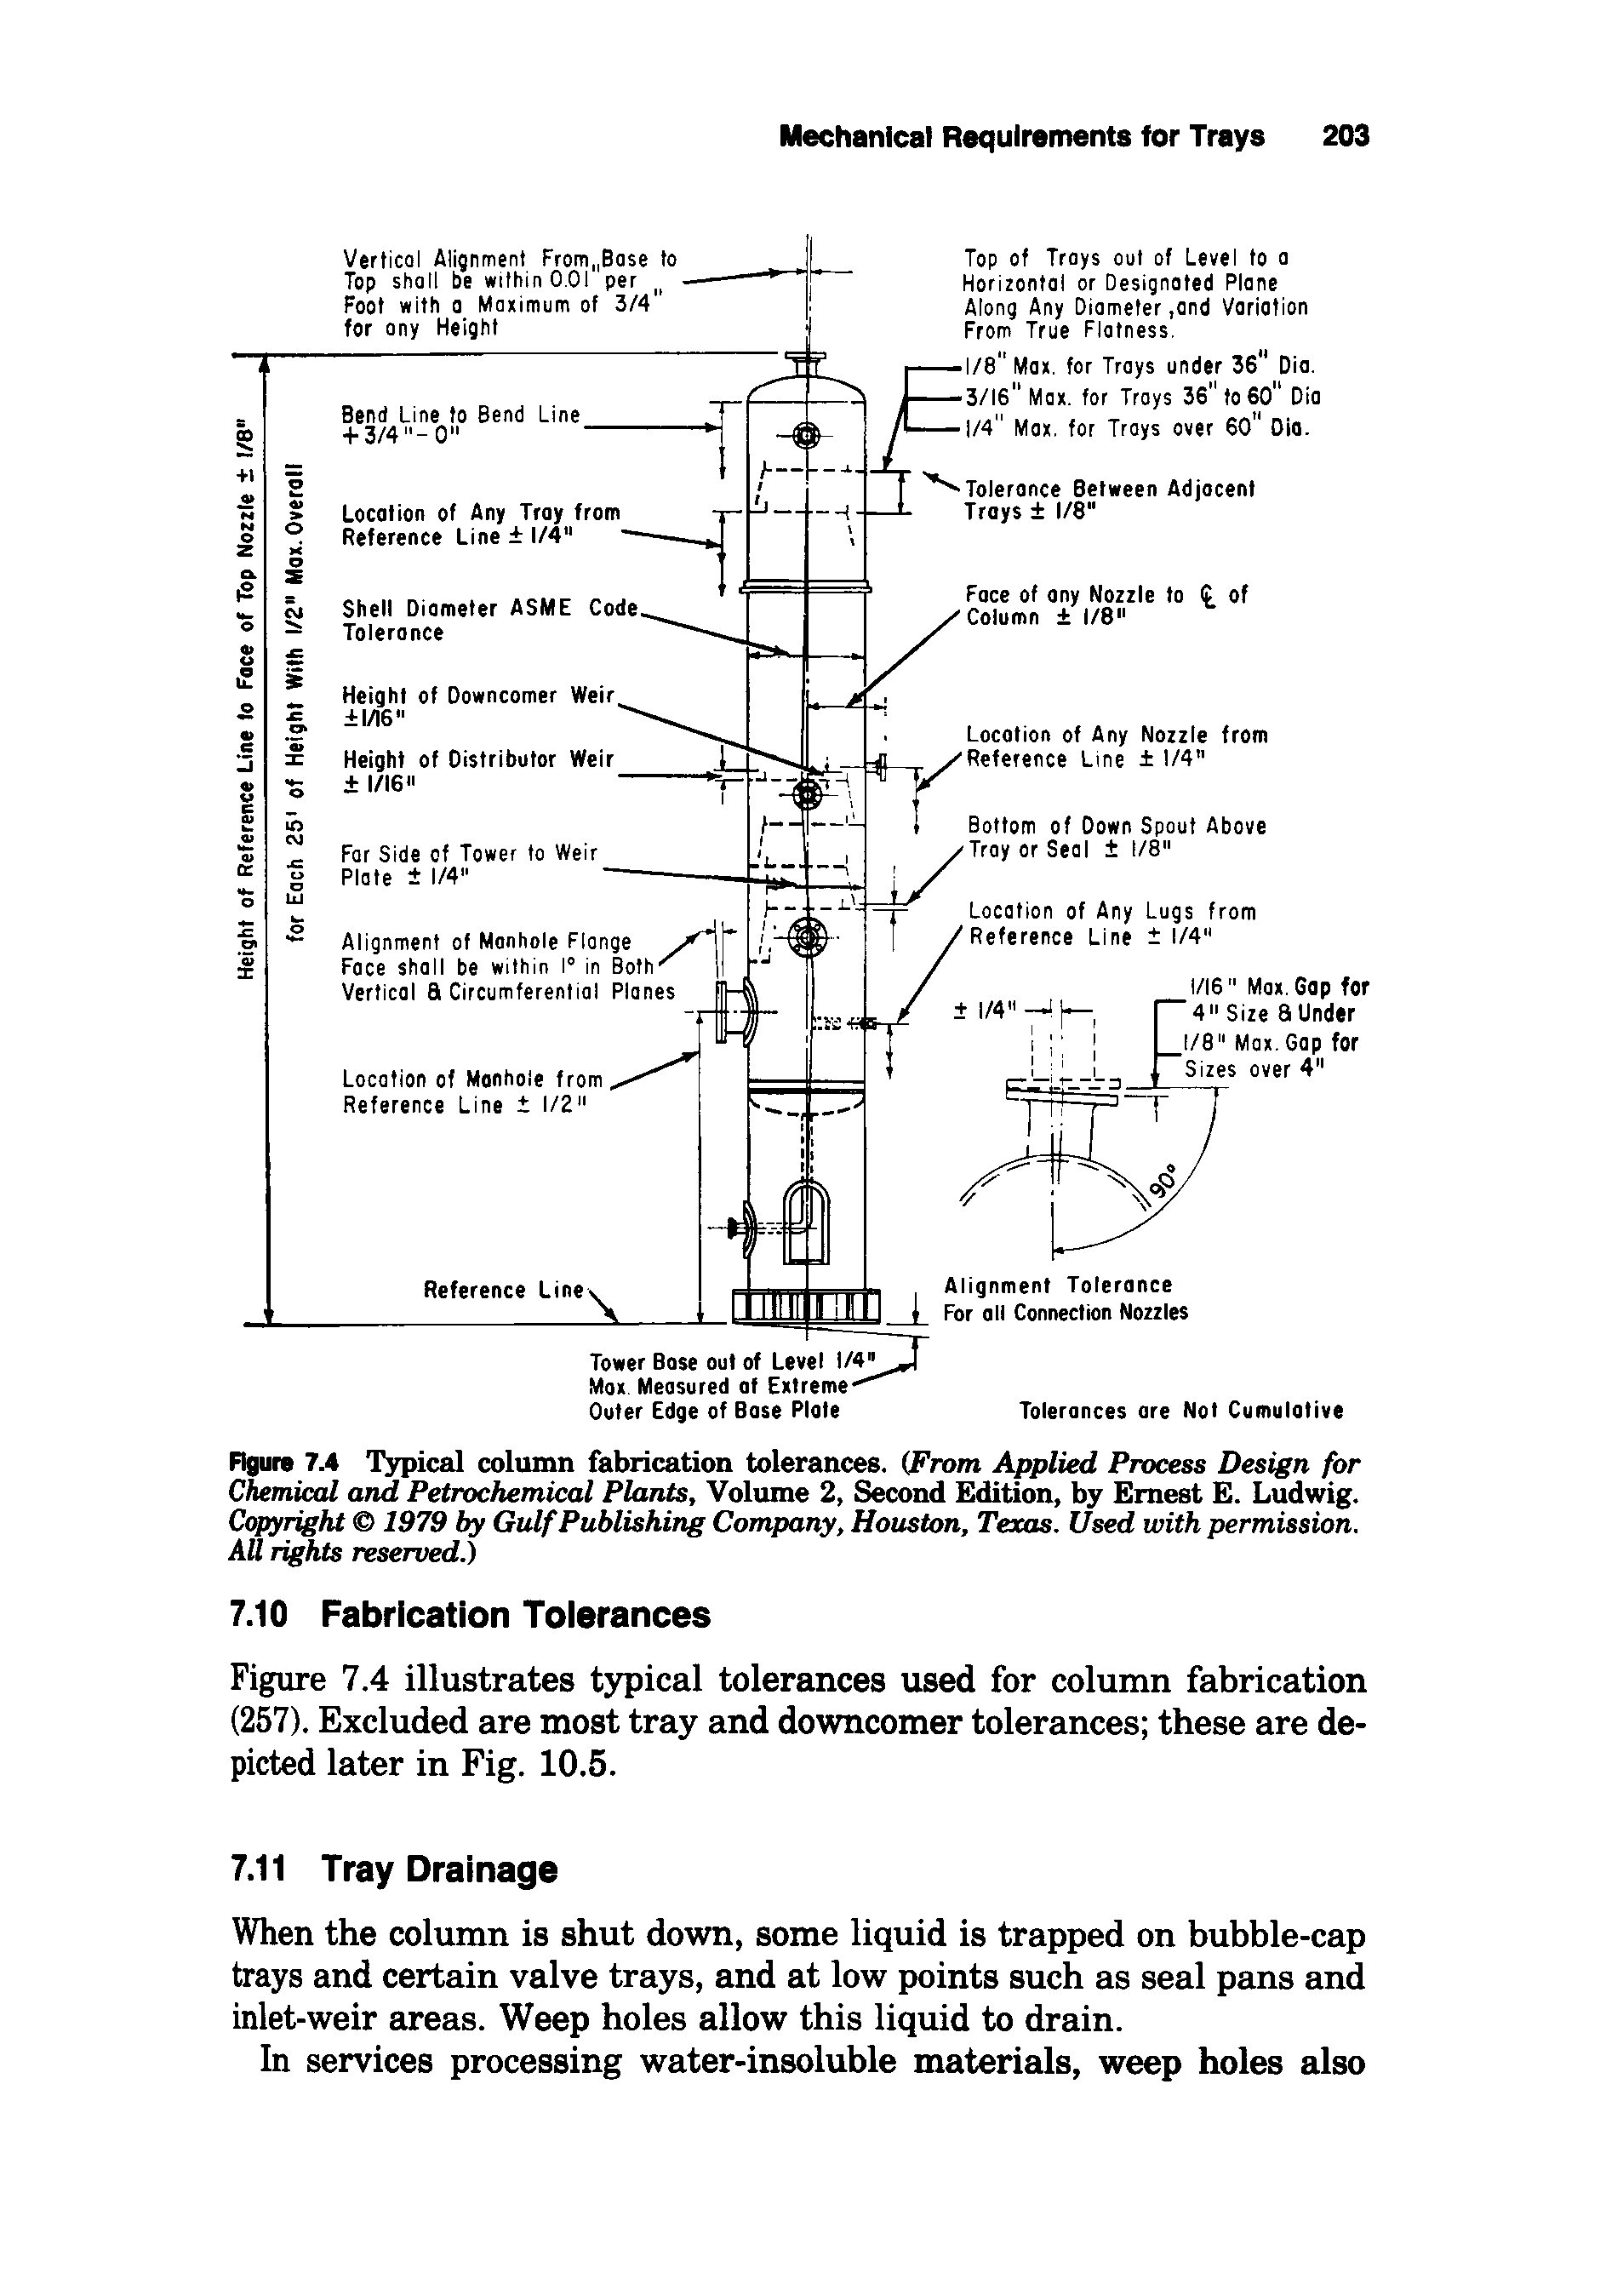 Figure 7.4 Typical column fabrication tolerances. (From Applied Process Design for Chemical and Petrochemical Plants, Volume 2, Second Edition, by Ernest E. Ludwig. Ccgiyi ht 1979 by Gulf Publishing Company, Houston, Texas. Used with permission. AU rights reserved.)...